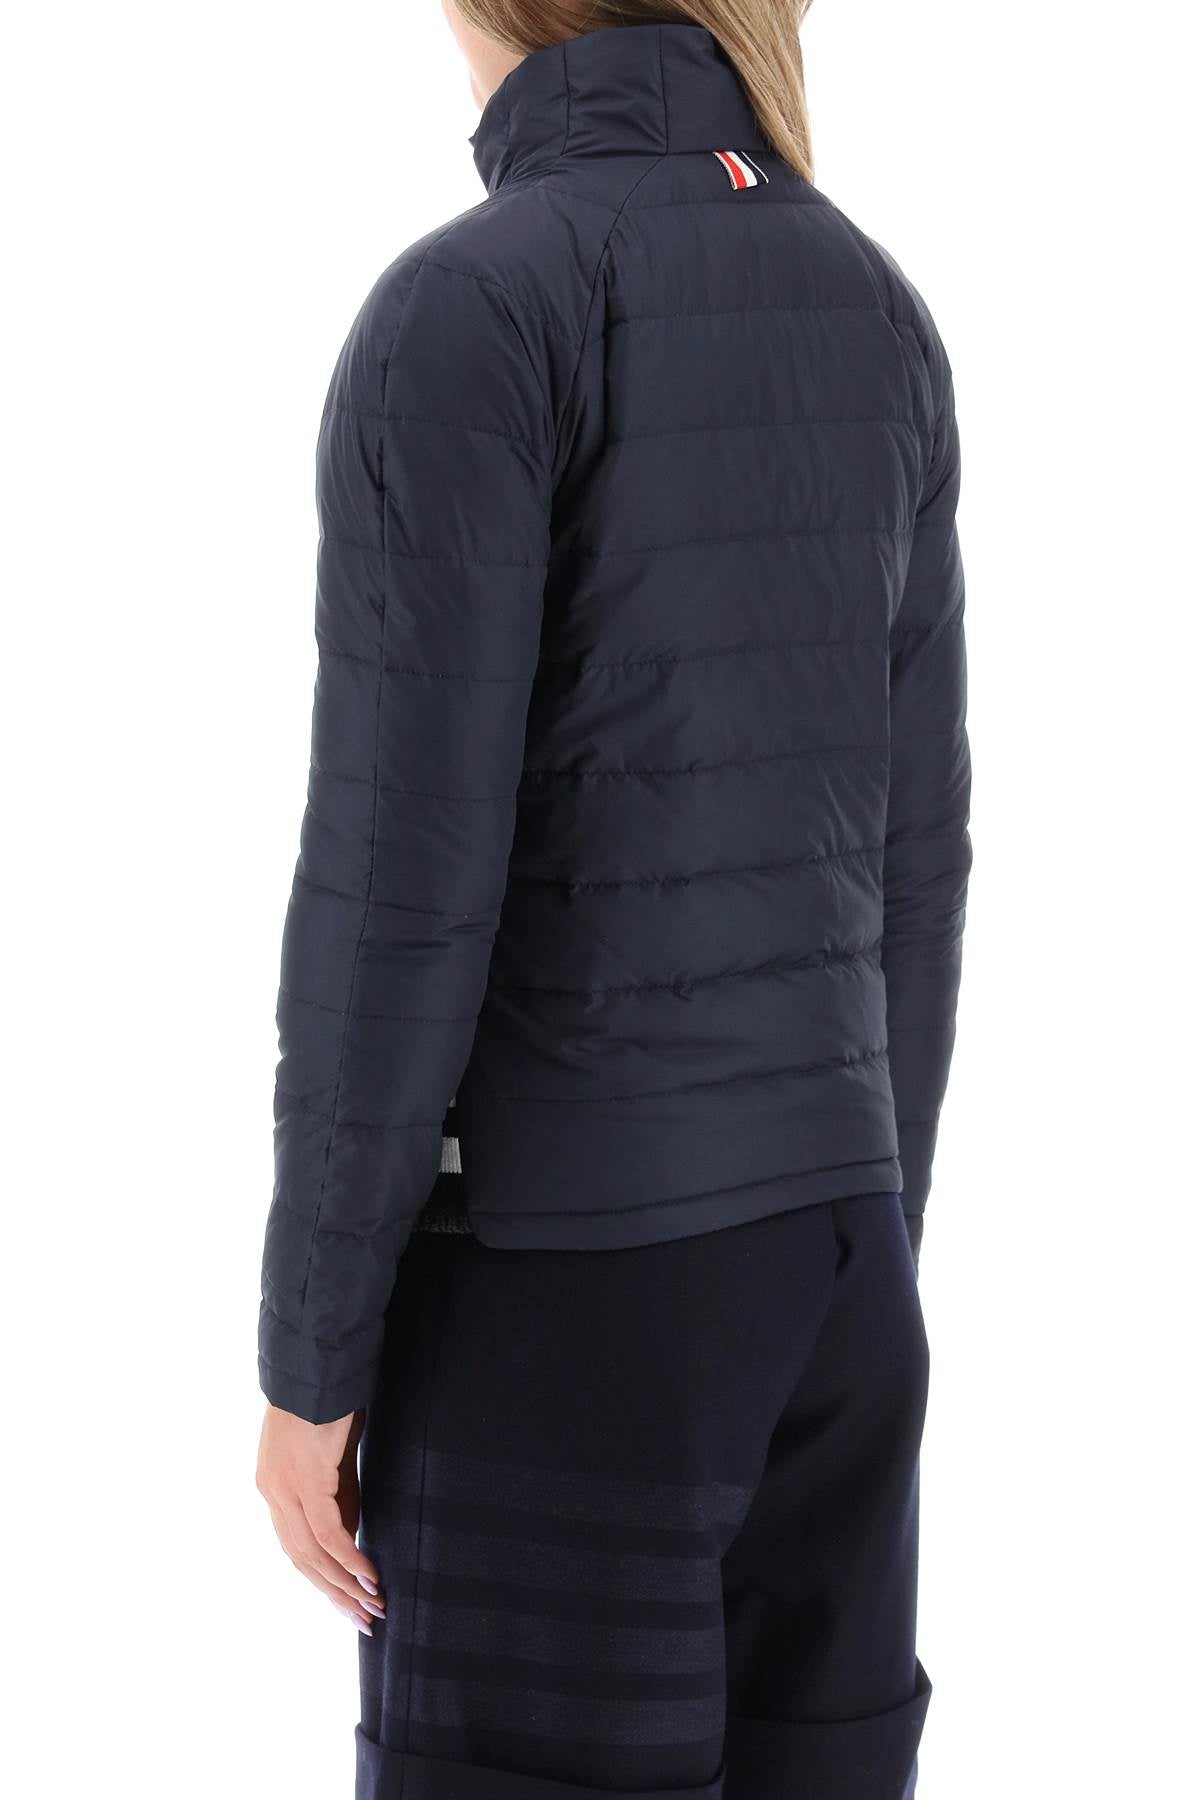 THOM BROWNE Quilted Puffer Jacket with 4-Bar Insert in Blue for Women - FW23 Collection